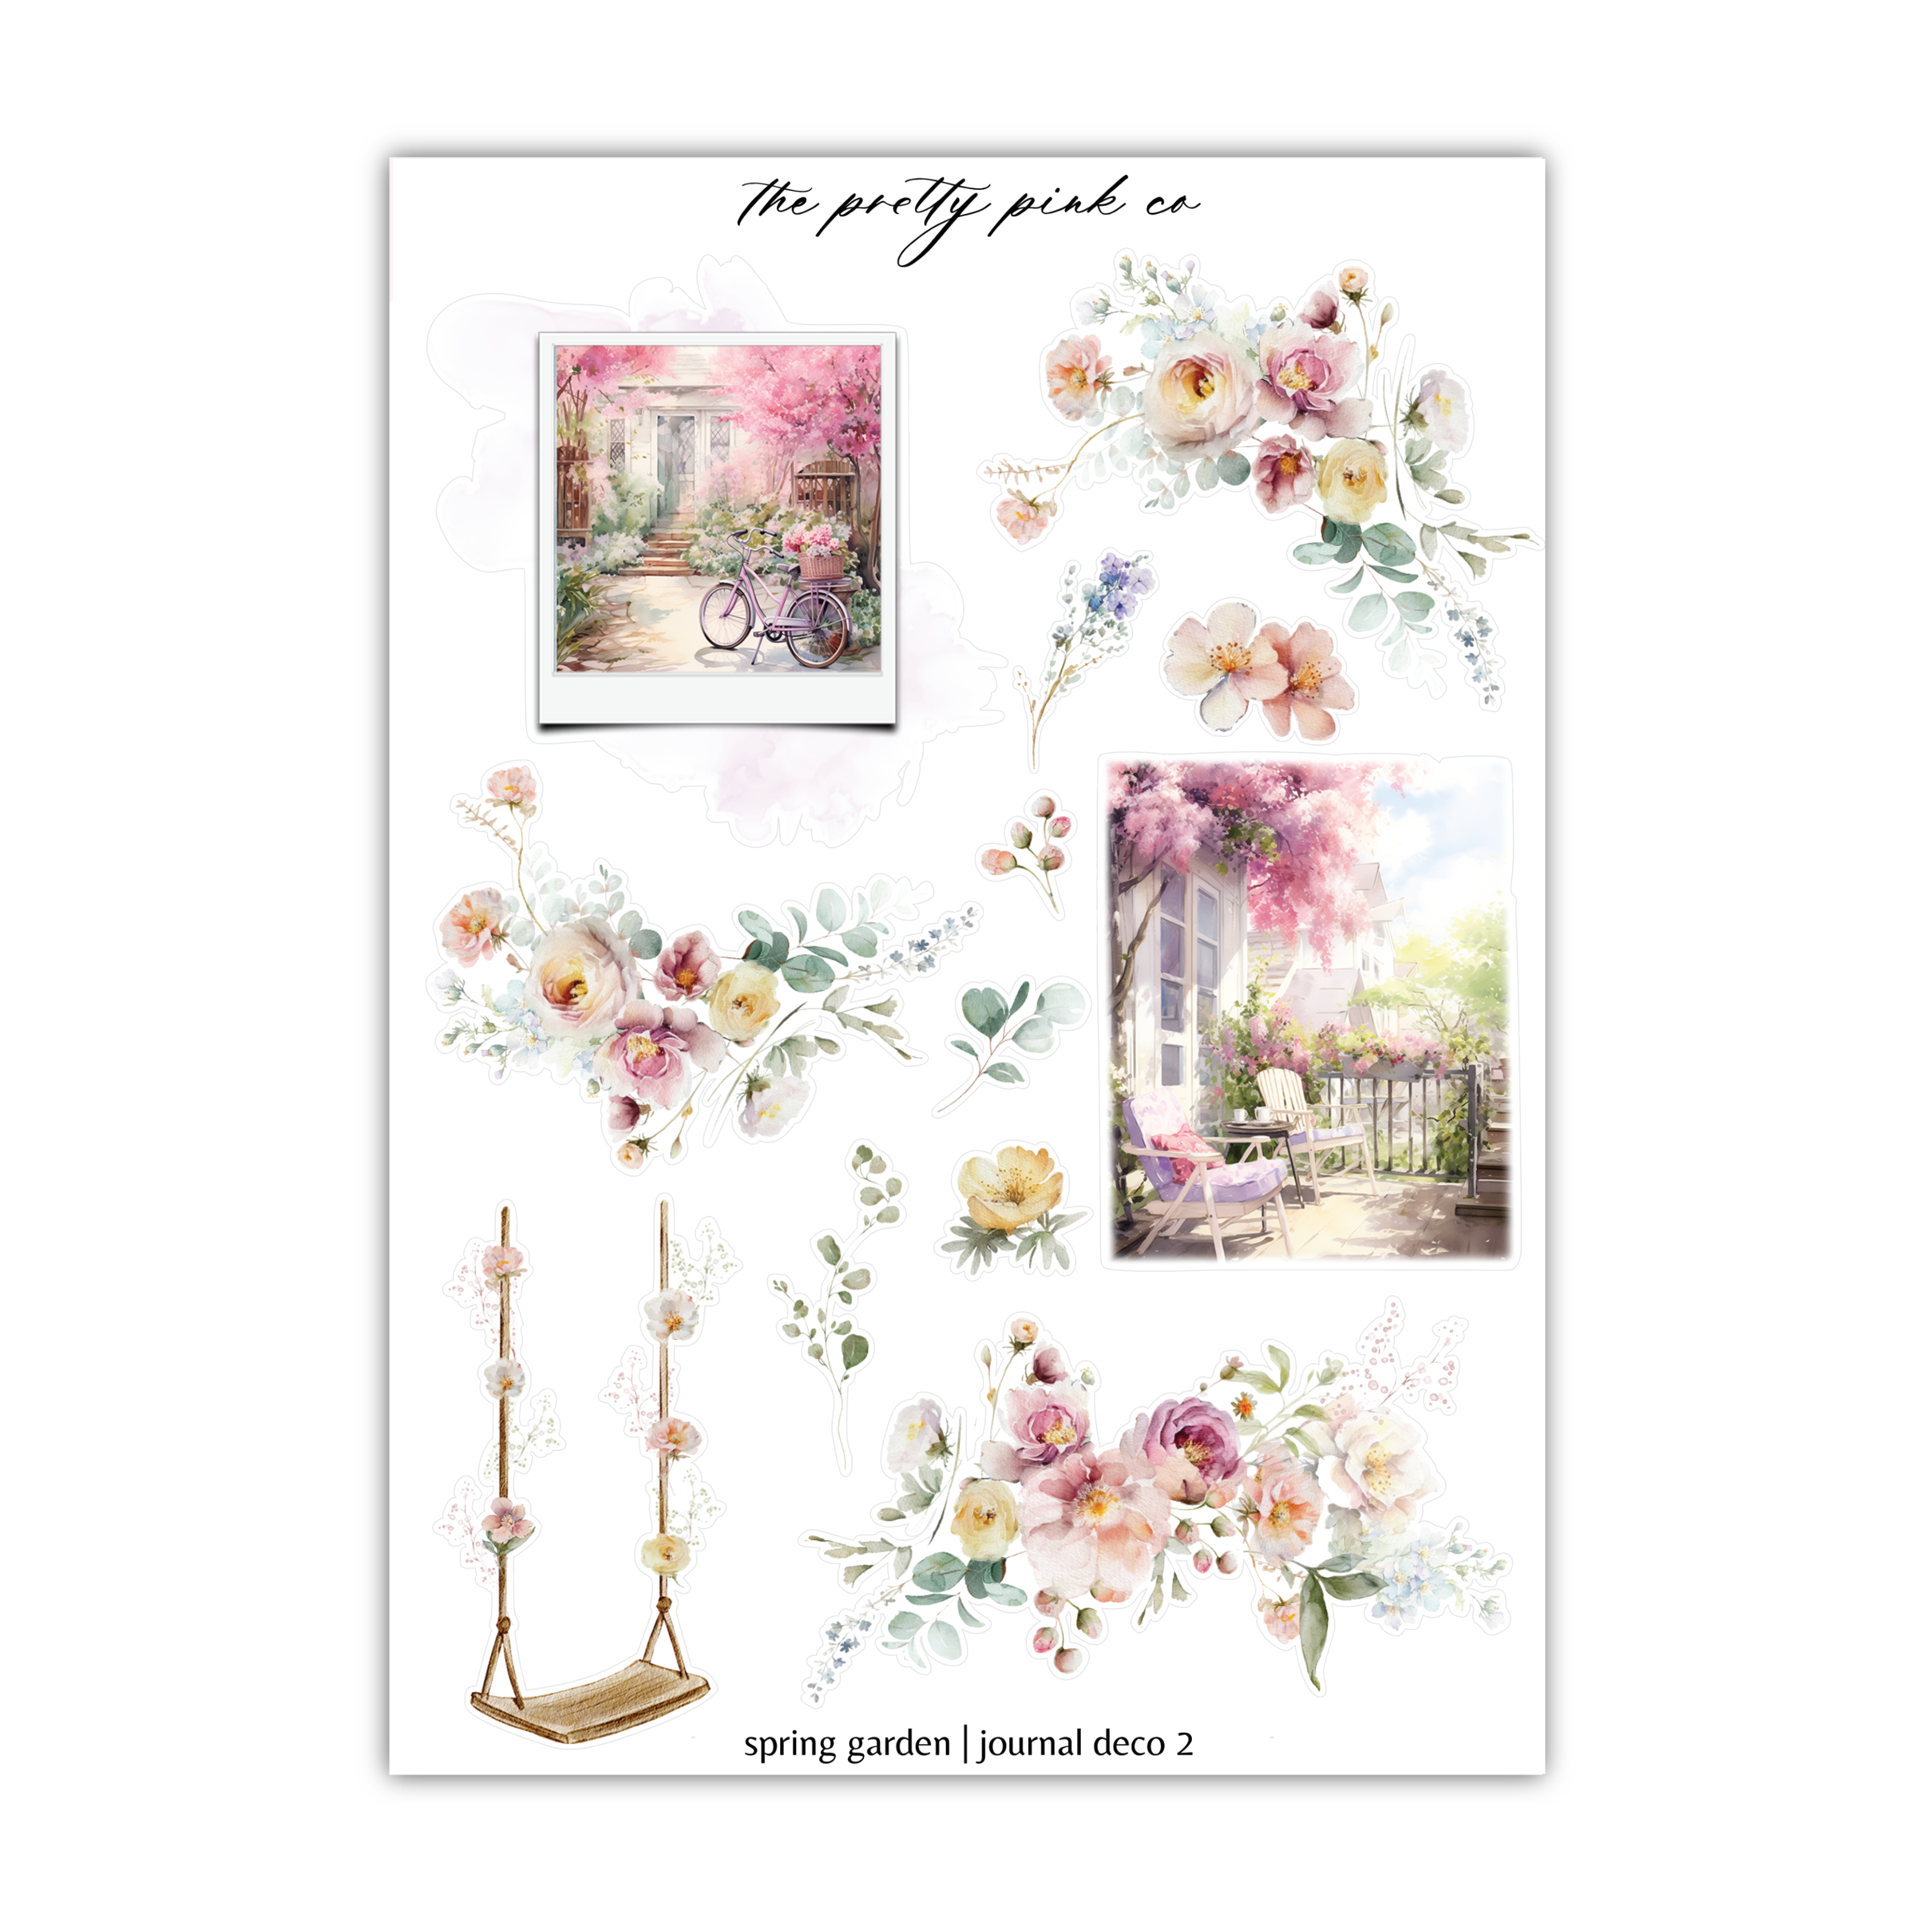 a card with a picture of flowers and a swing